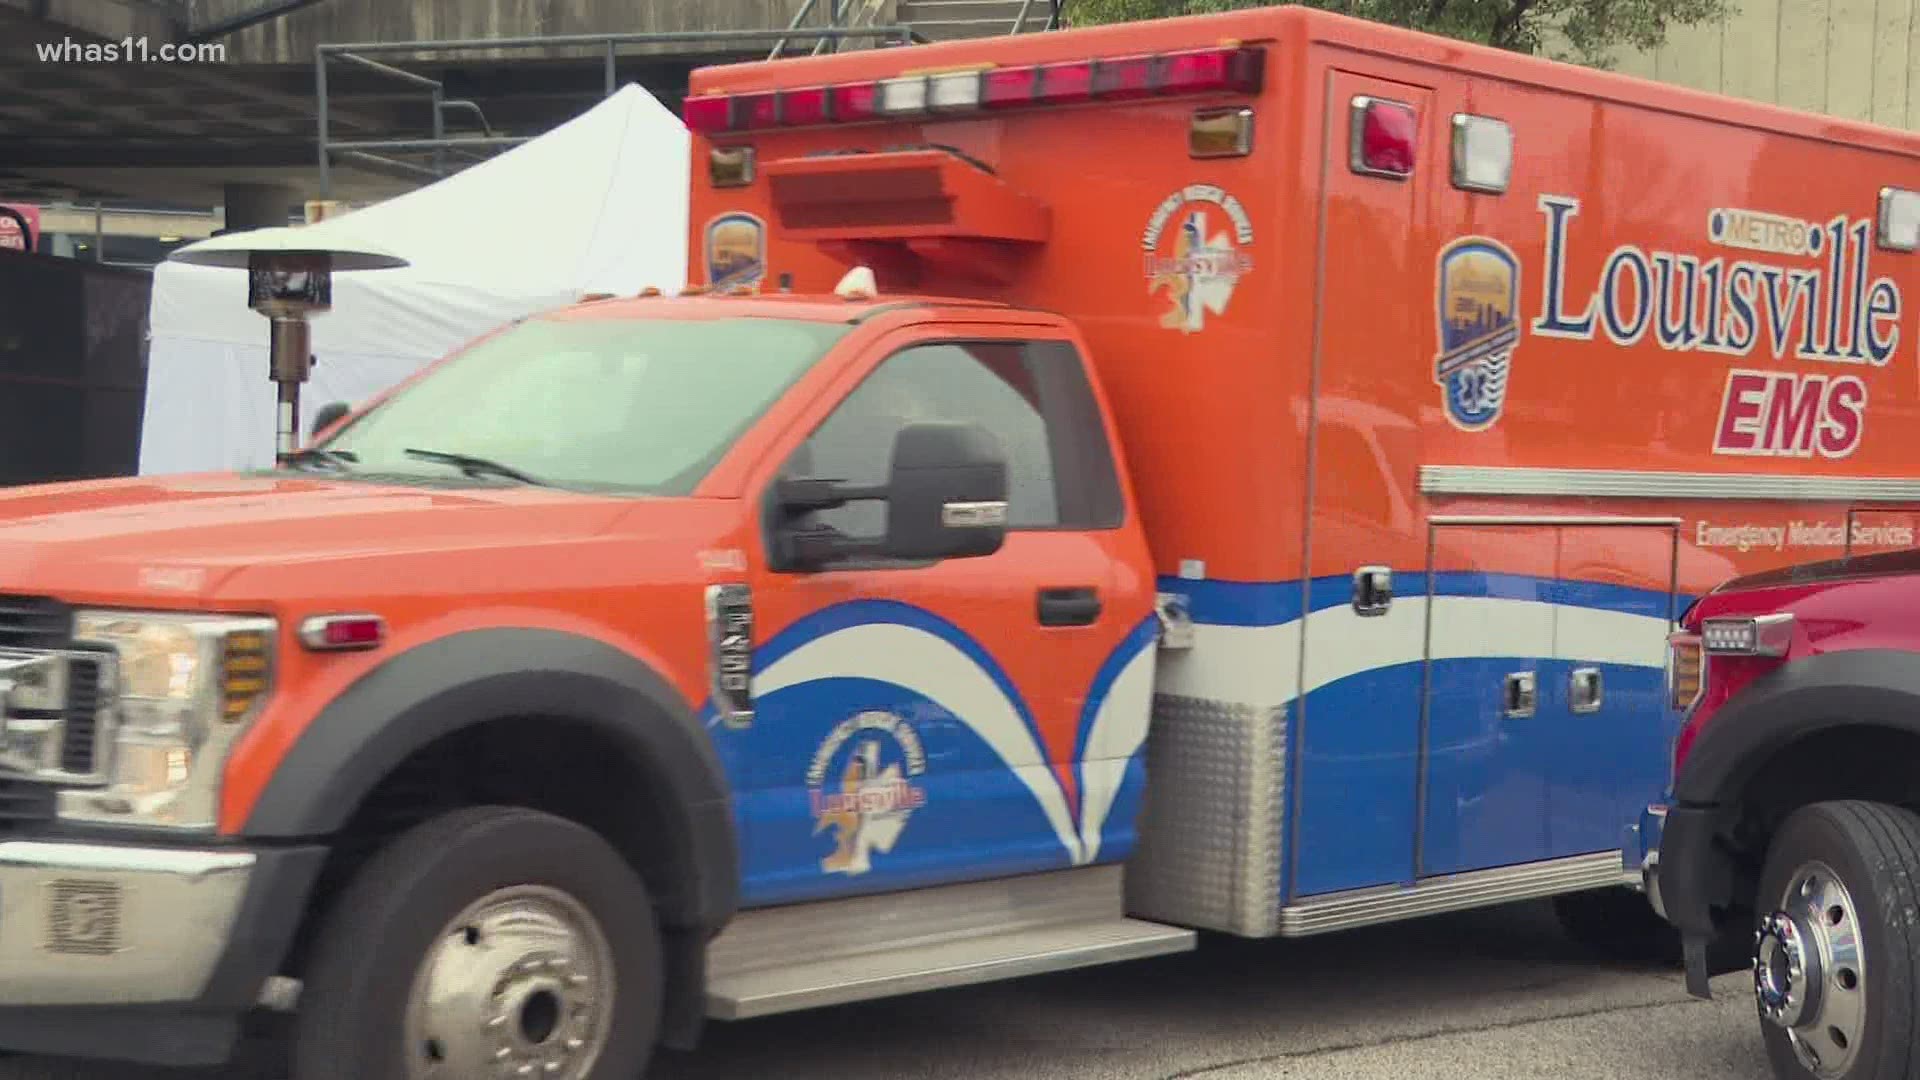 Two hundred fifty first responders in Louisville will get the vaccine by Wednesday.